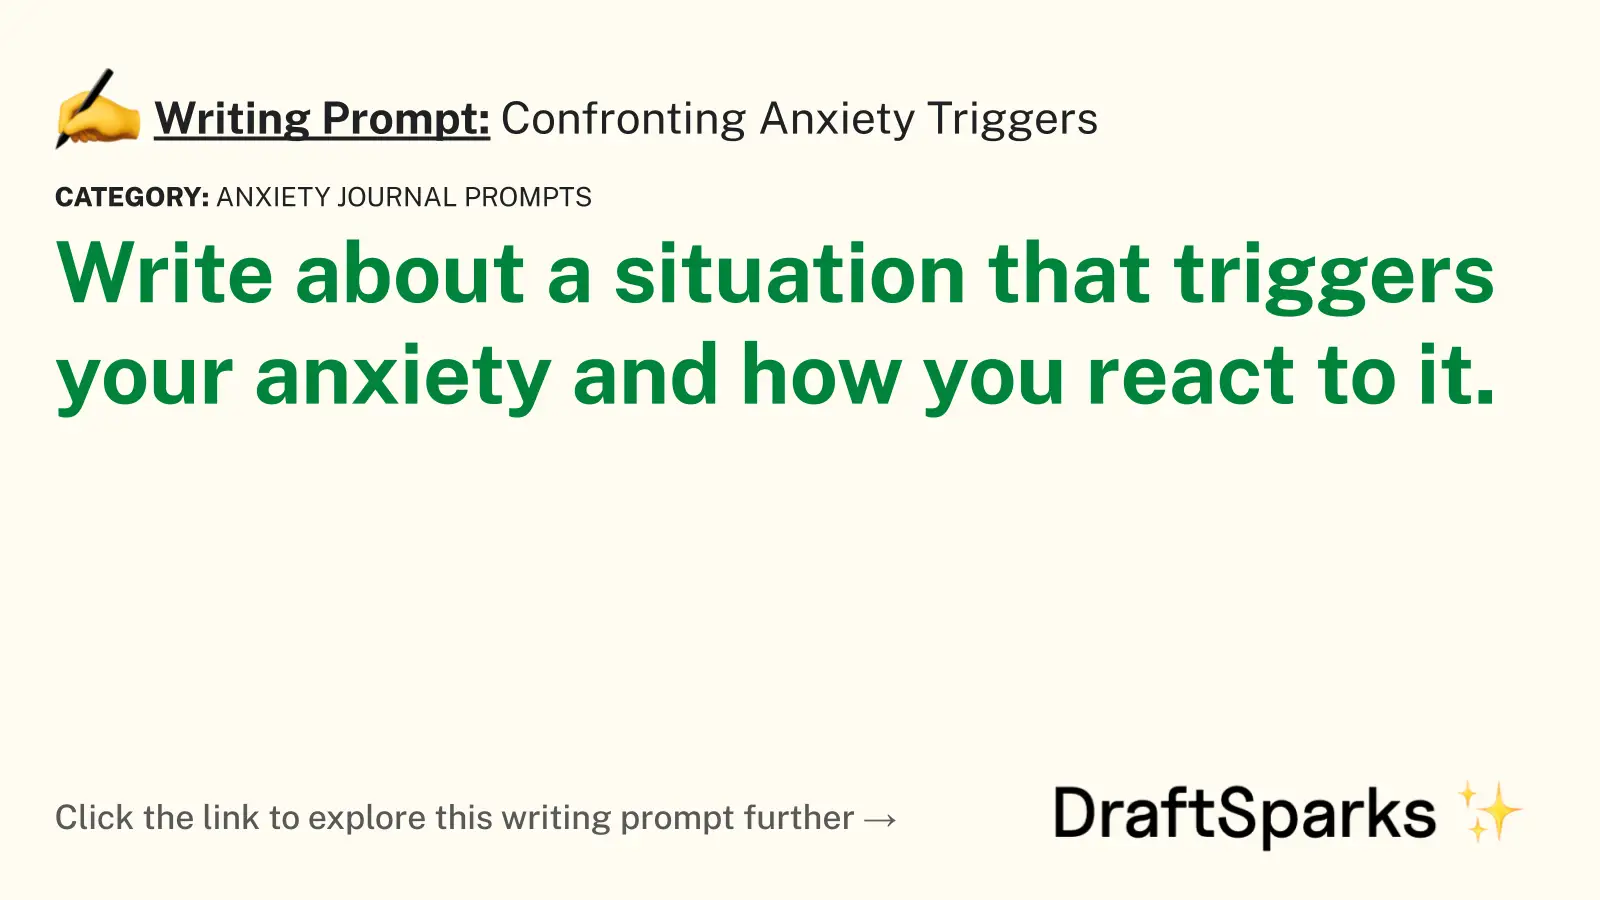 Confronting Anxiety Triggers